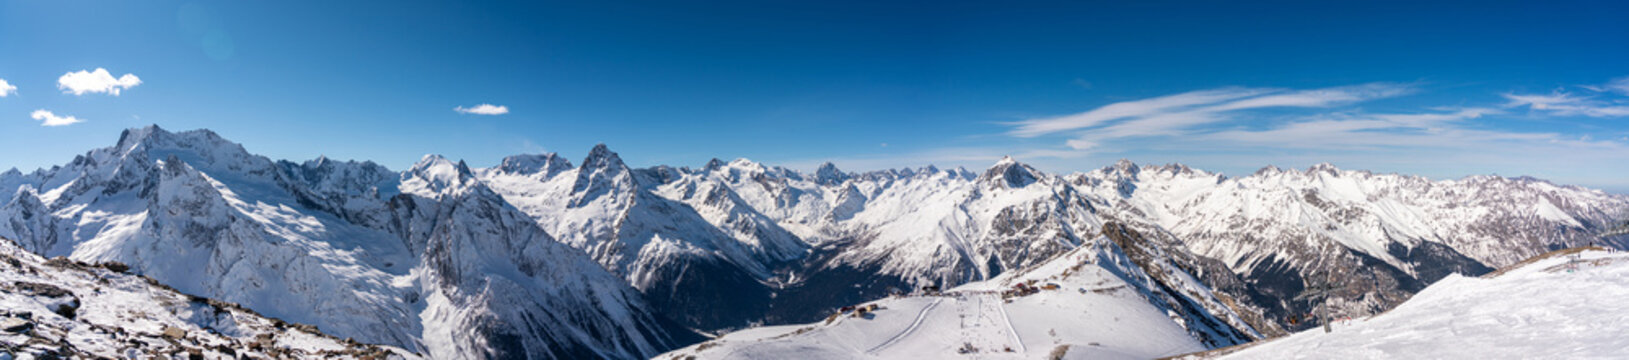 Panoramic view of winter snowy mountains in Caucasus region in Russia with blue sky